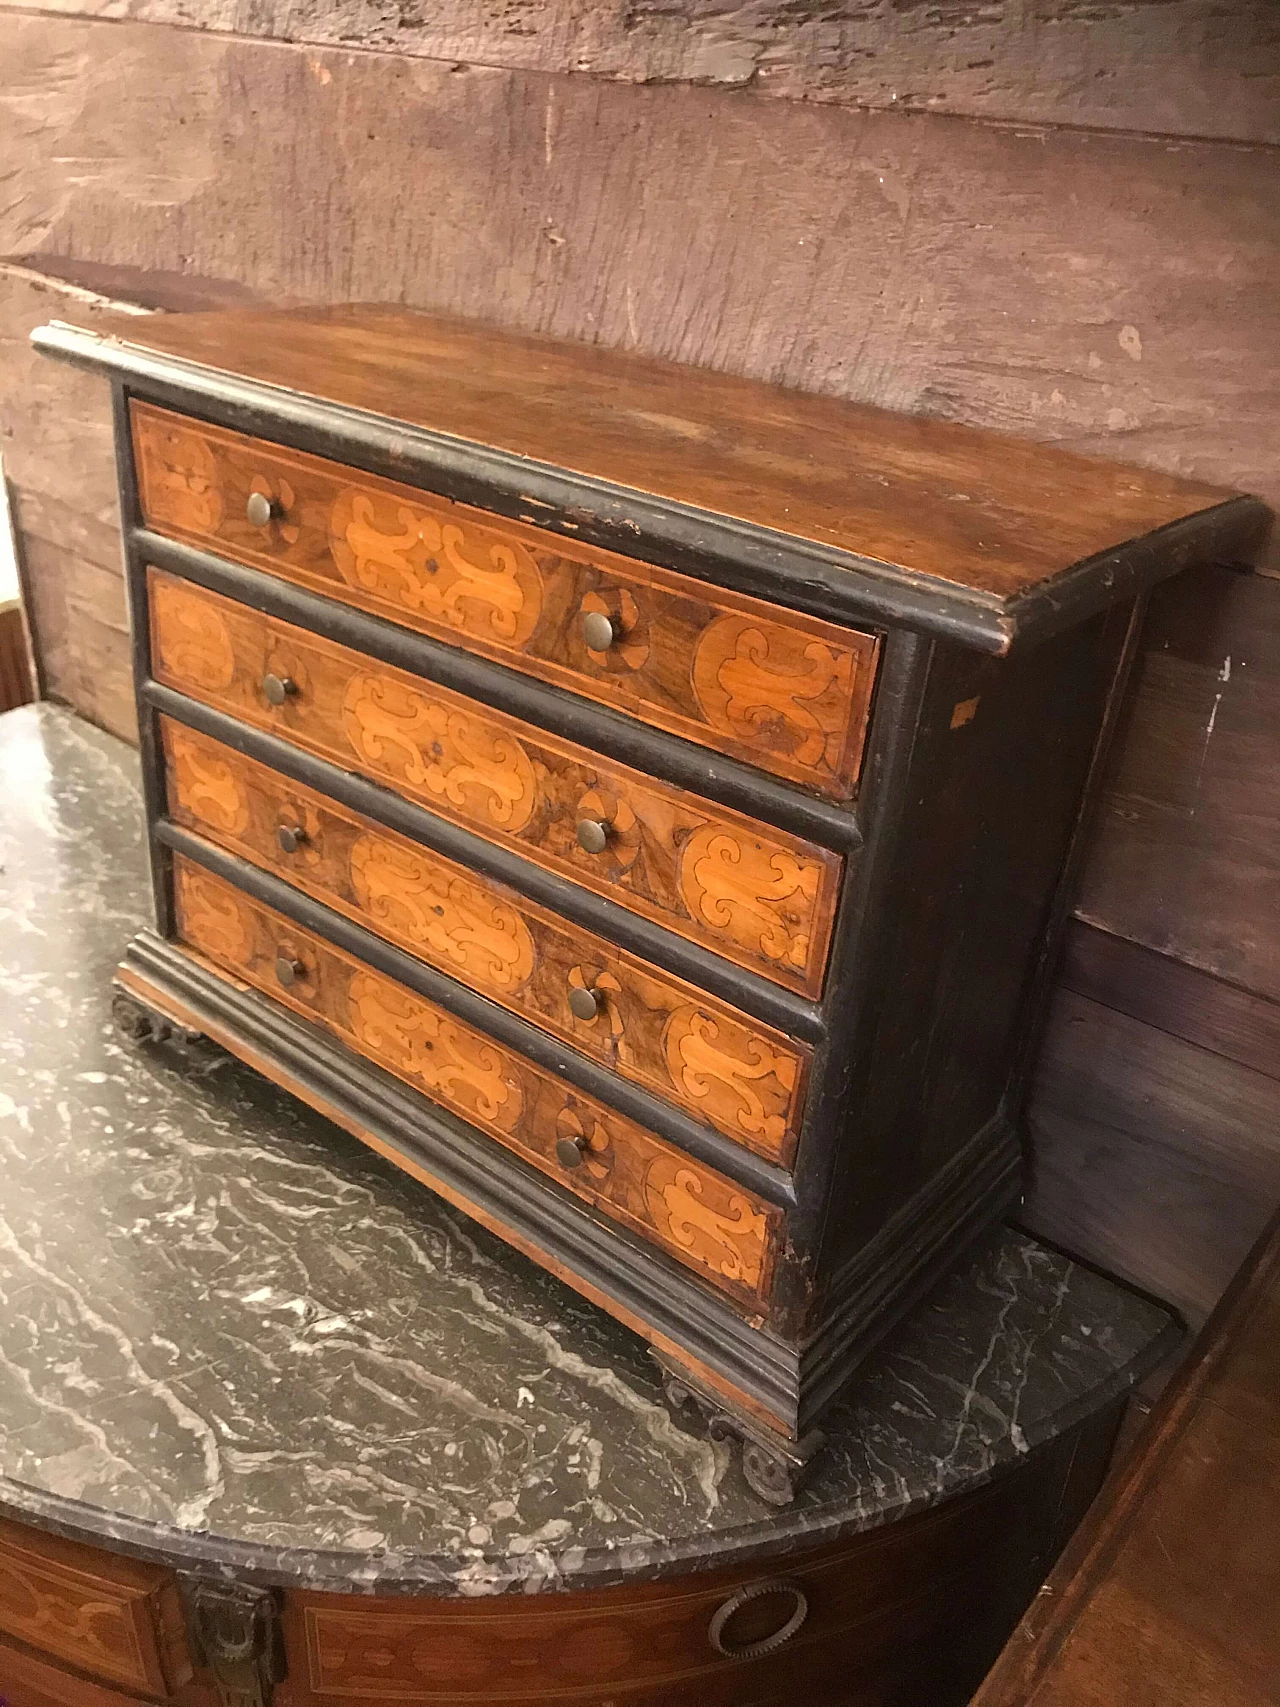 Lombard antique miniature dresser, prototype or model in inlaid walnut, original early 18th century 1185861